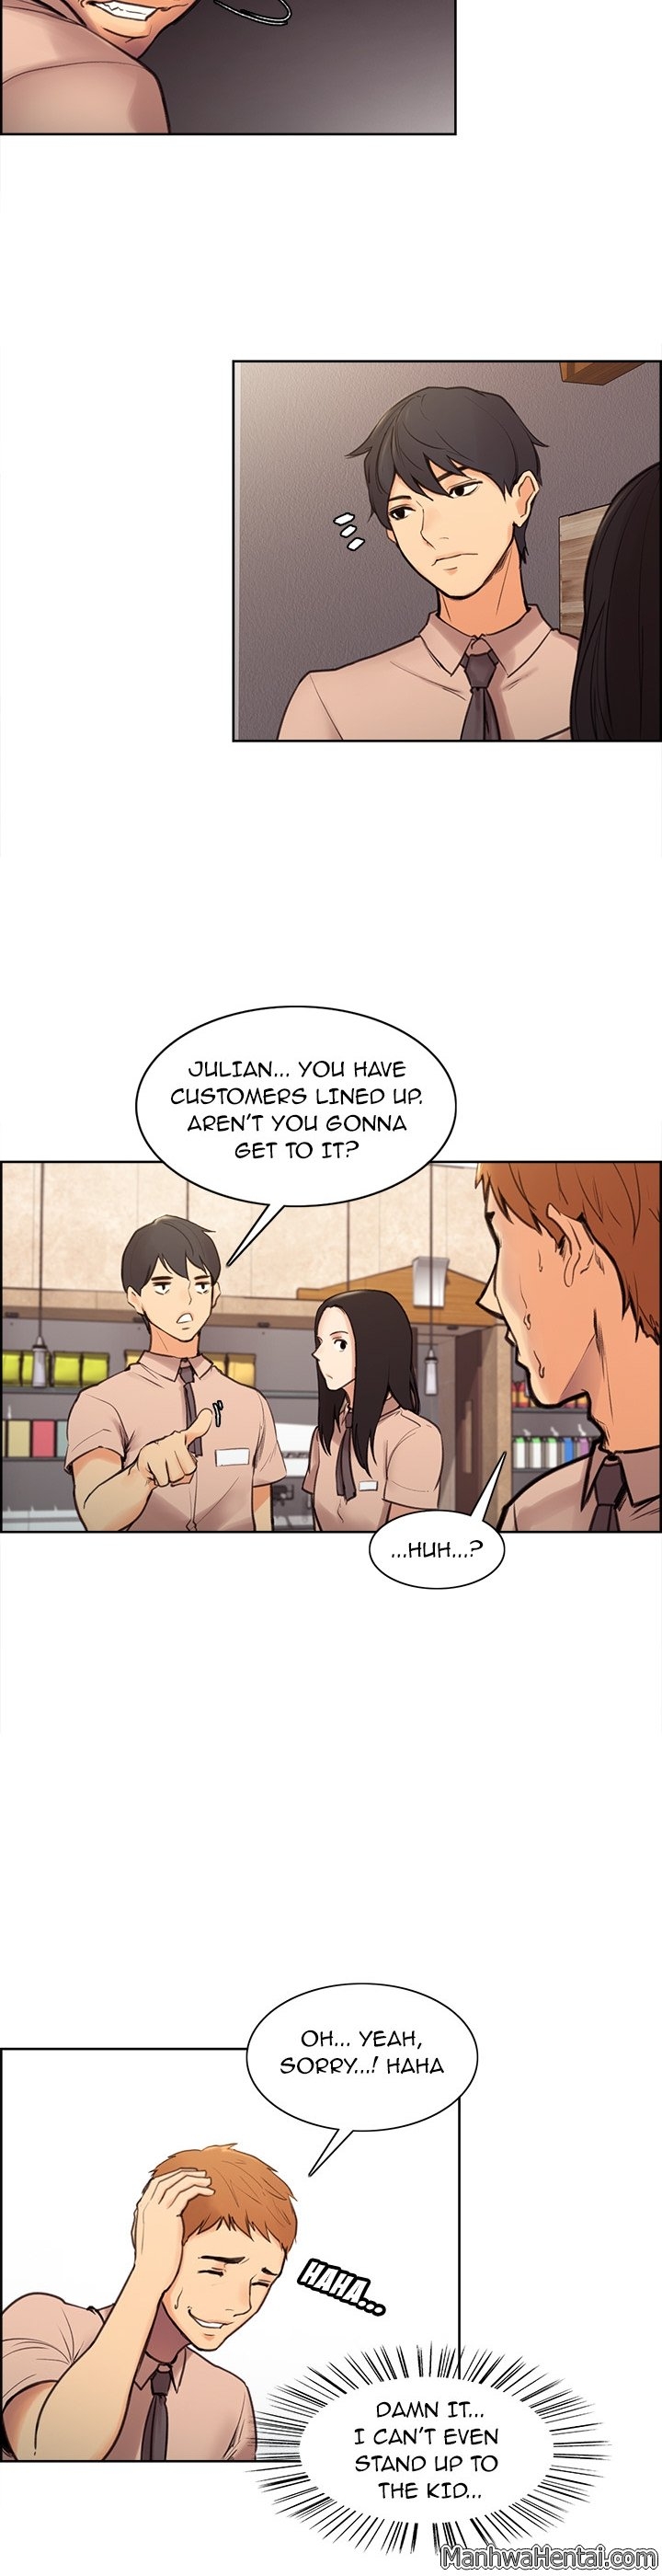 [Serious] The Sharehouse Ch. 1-11 [English] 3